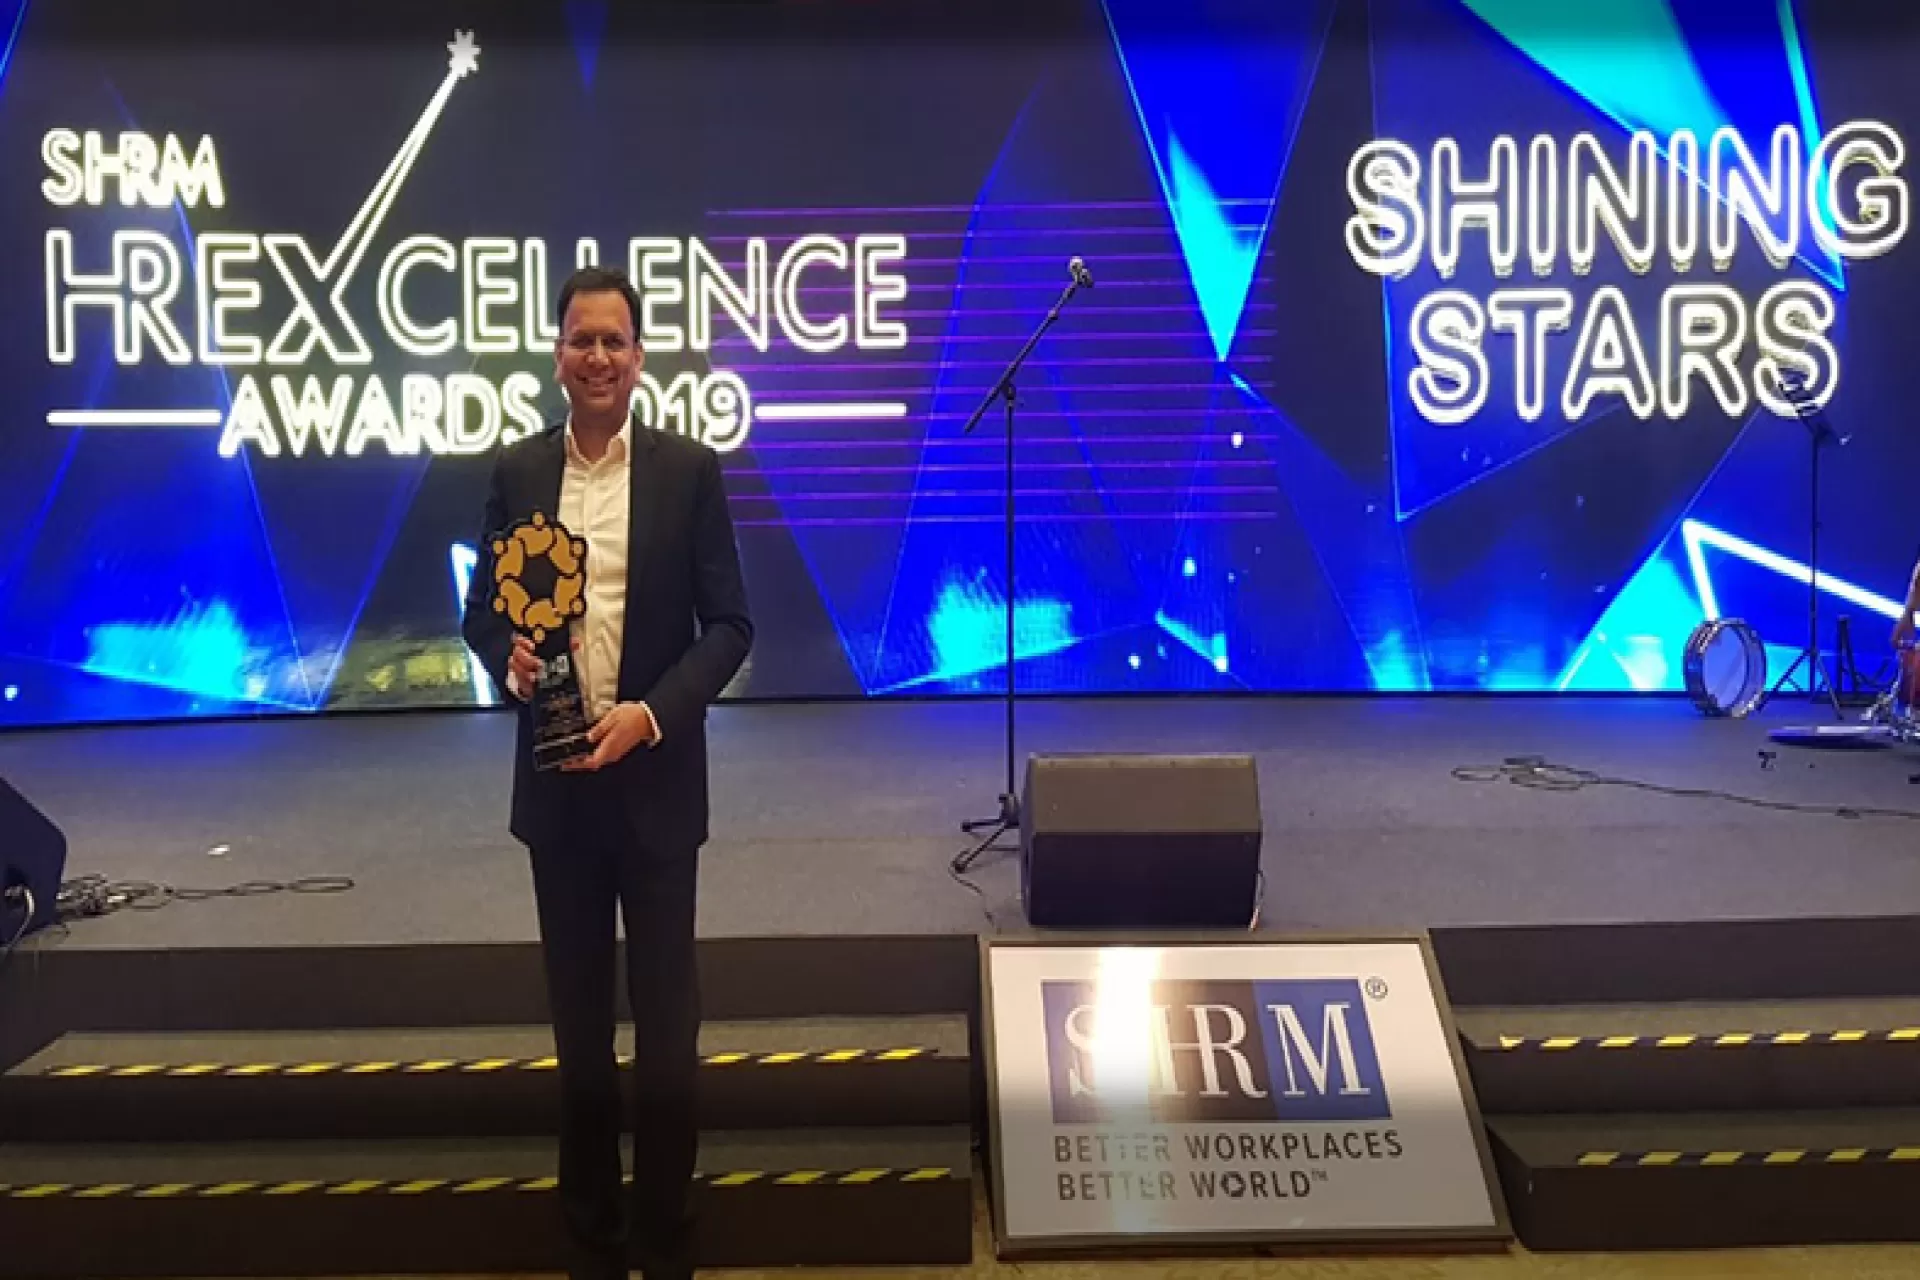 Zensar wins at the SHRM HR Excellence Awards 2019